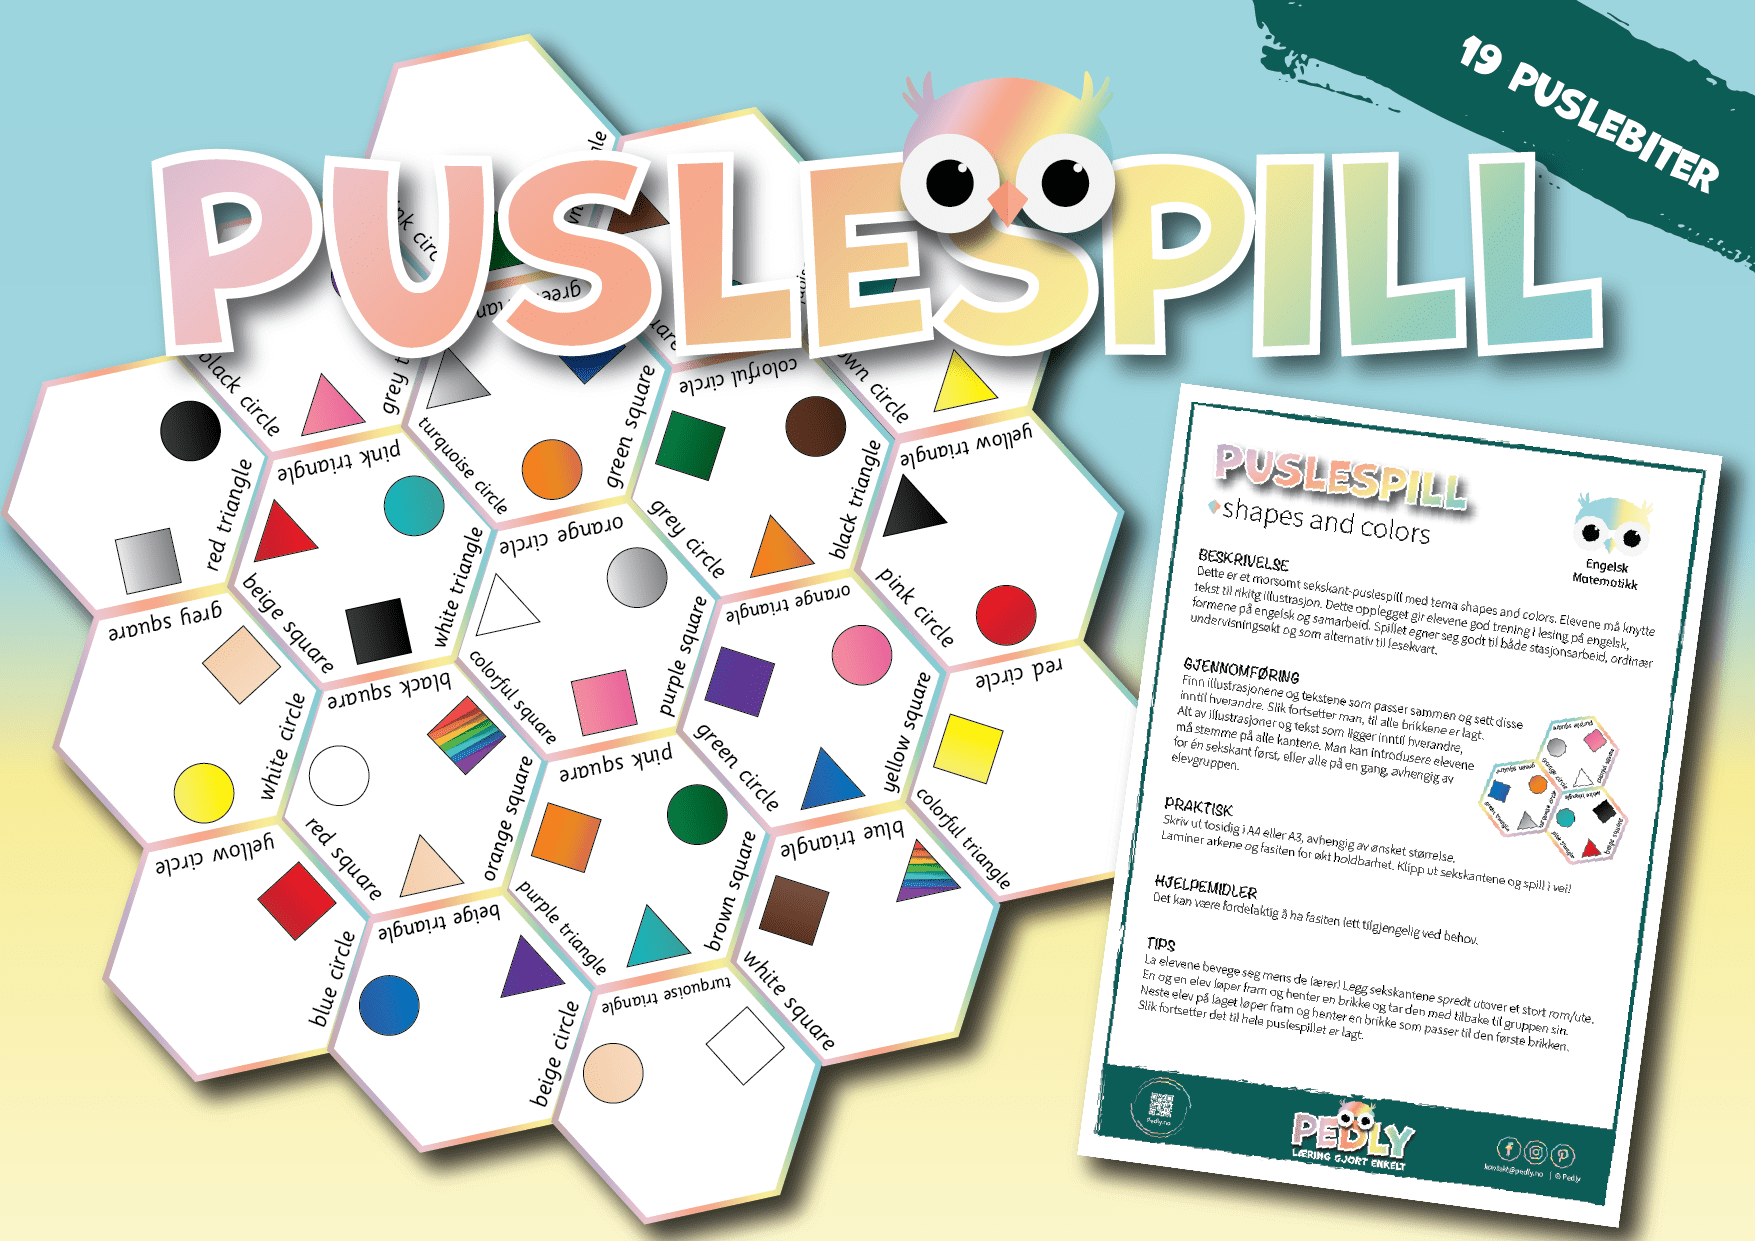 Puslespill: shapes and colors